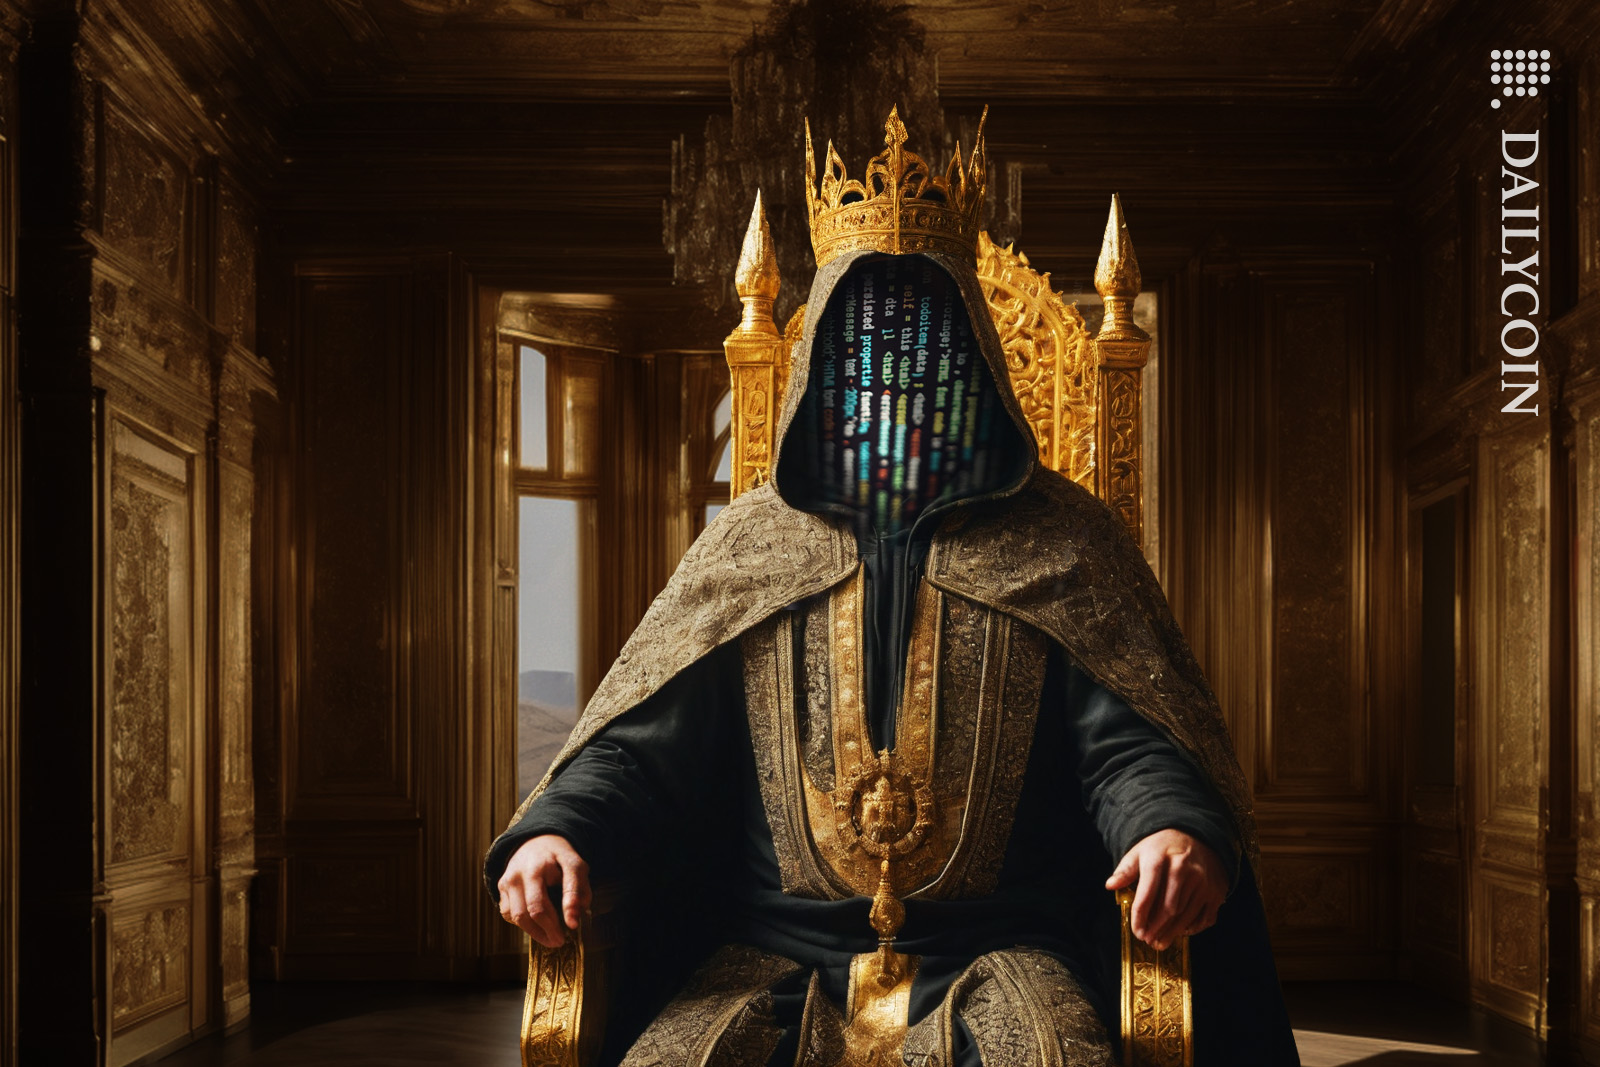 A hacker sitting in a throne in a golden room.